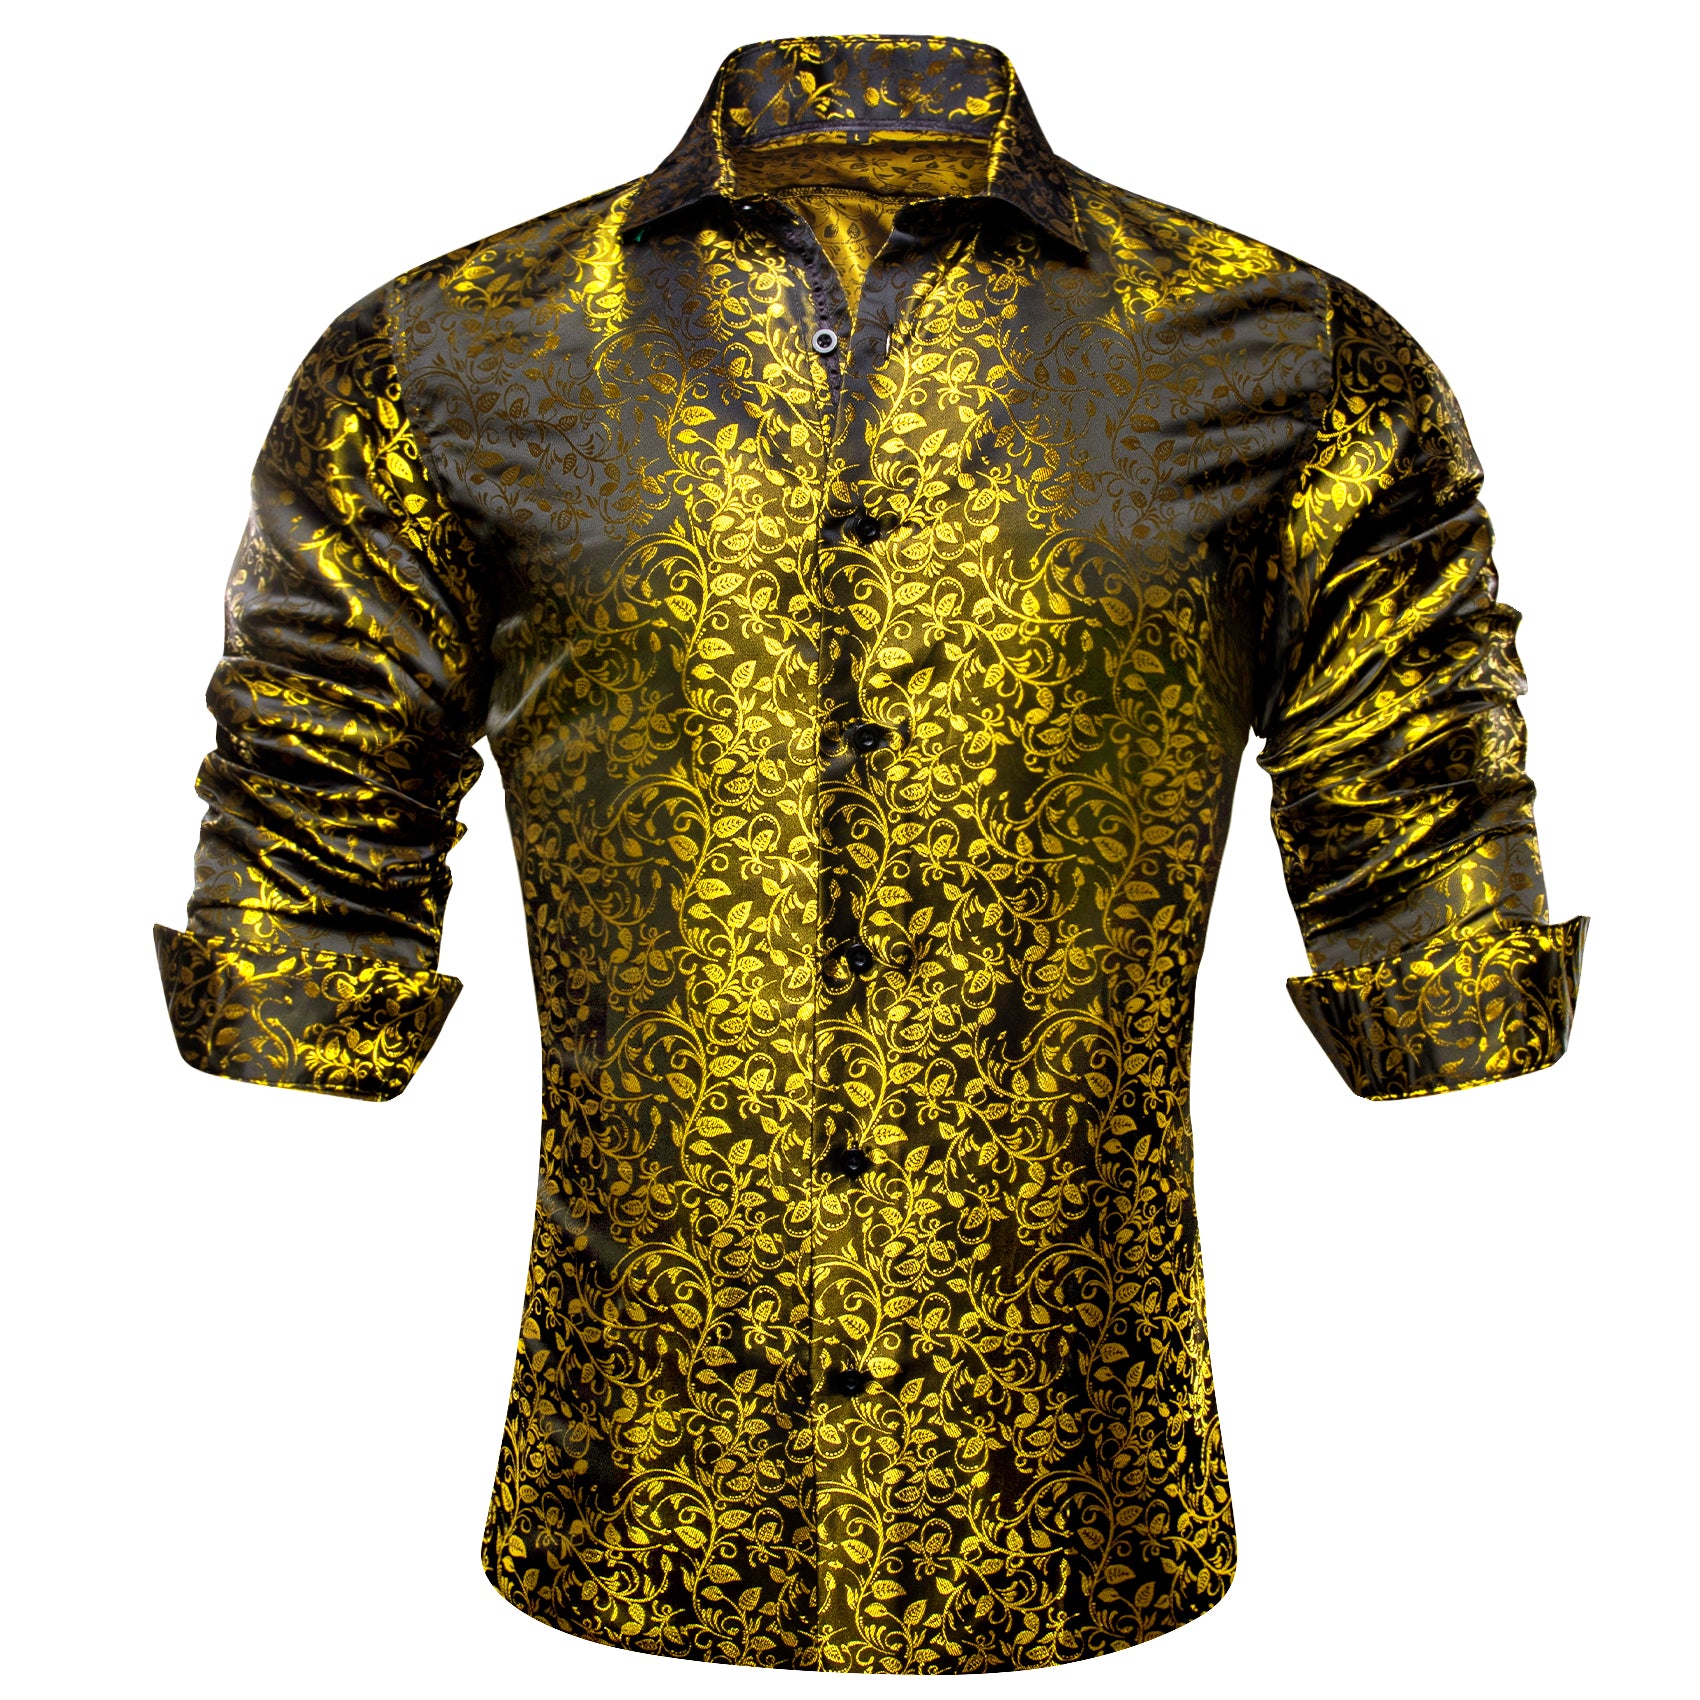 Barry.wang Luxury Olive Green Leaves Floral Silk Shirt